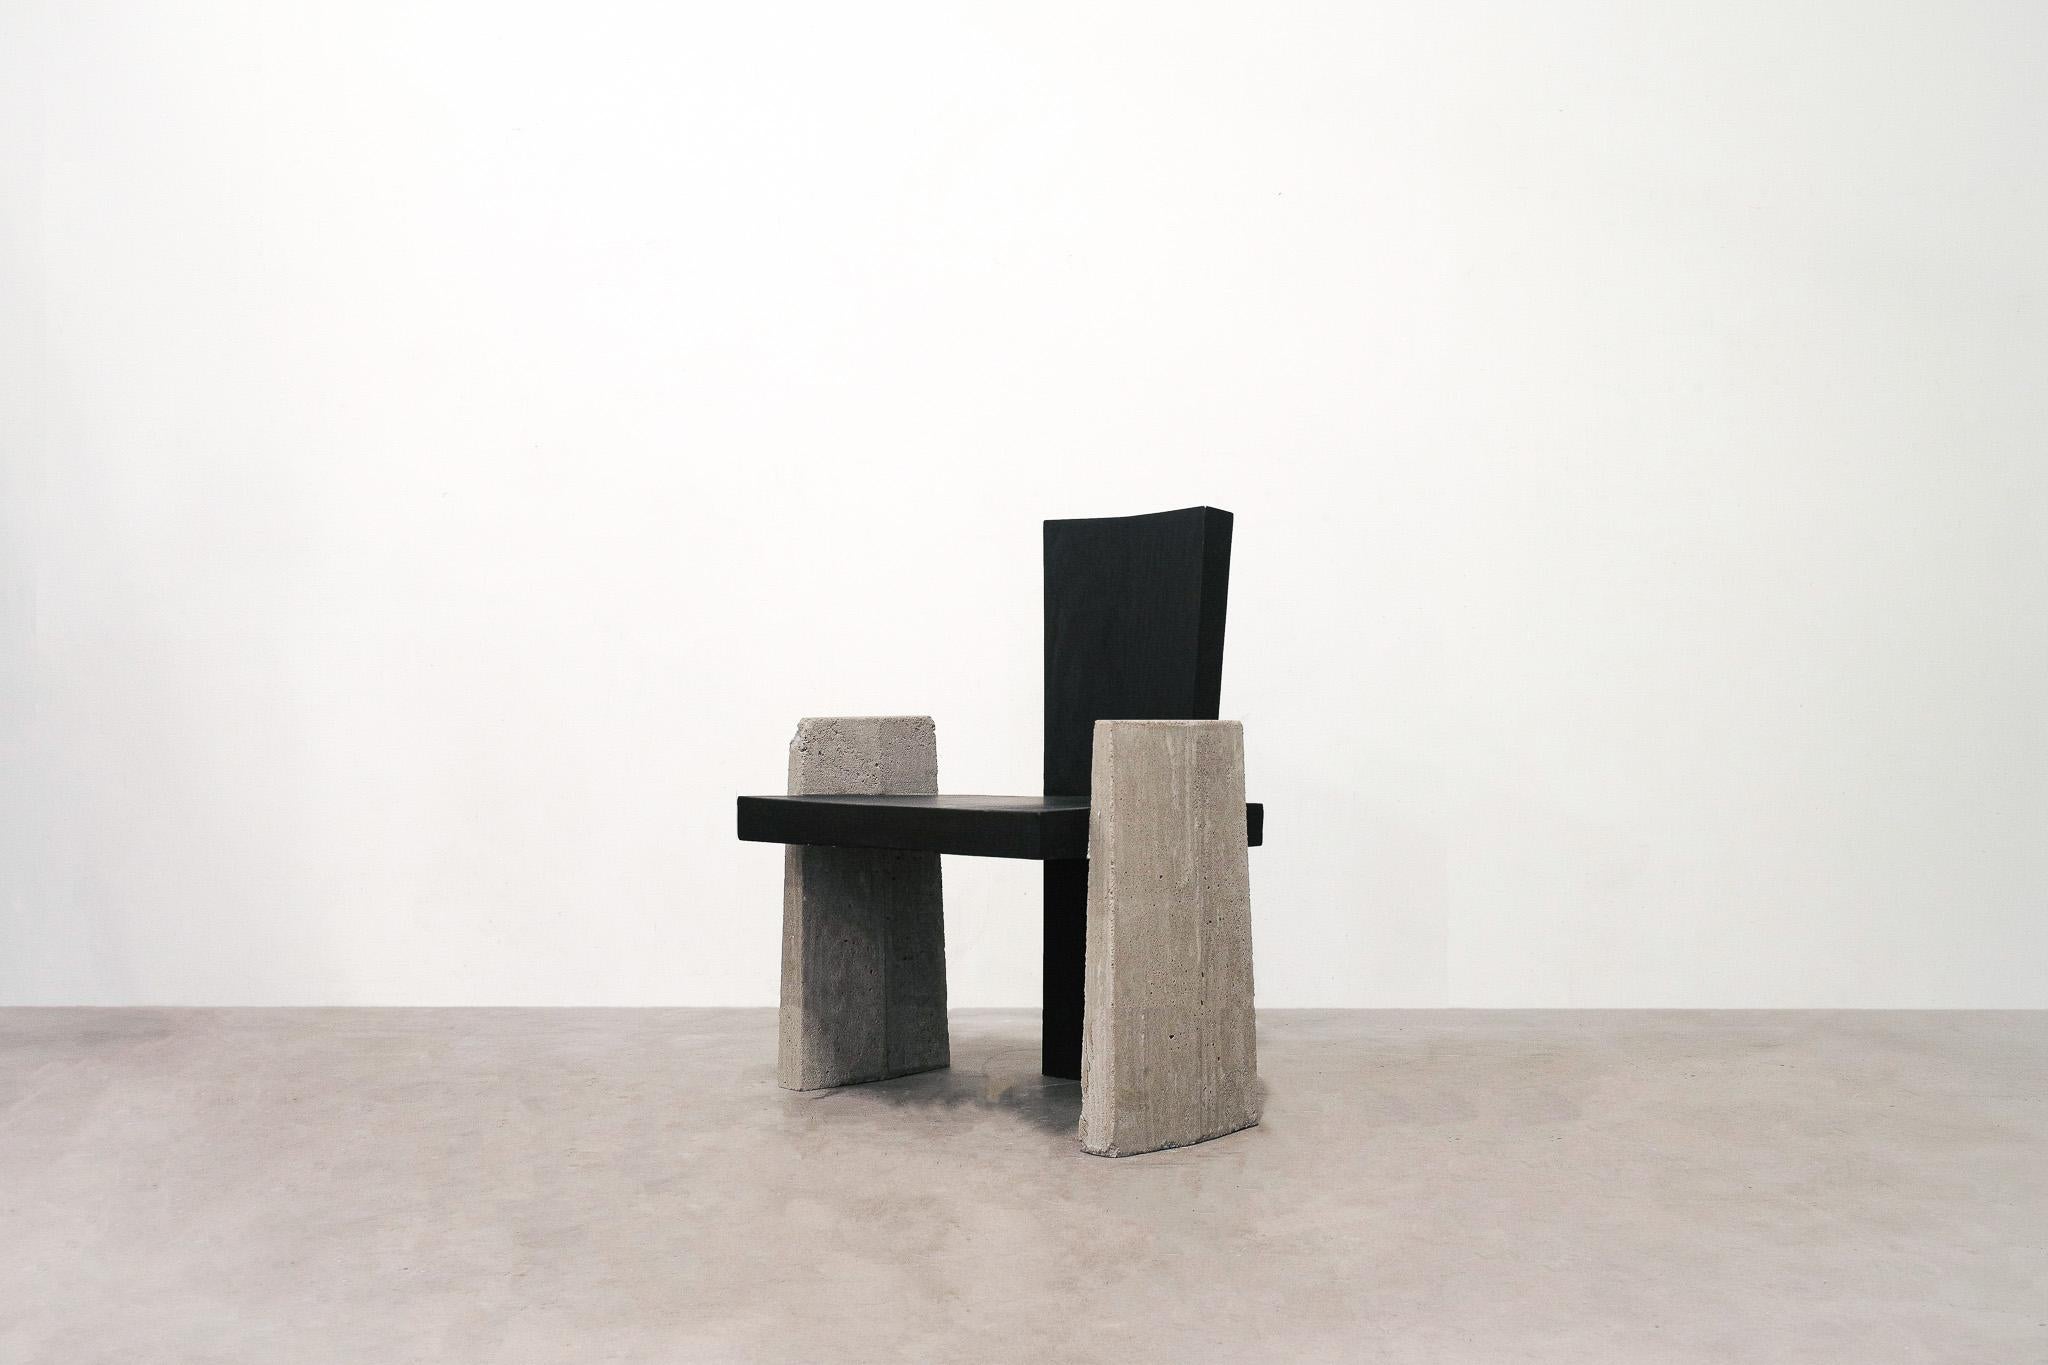 Tron Chair by Lucas Tyra Morten
2022
Limited Edition of 9
Dimensions: W 66 x D 59 x H 80  cm
Material: Plywood, Concrete, Wax

Occupying the liminal space between art and design, the multidisciplinary atelier of Lucas and Tyra Morten is a small